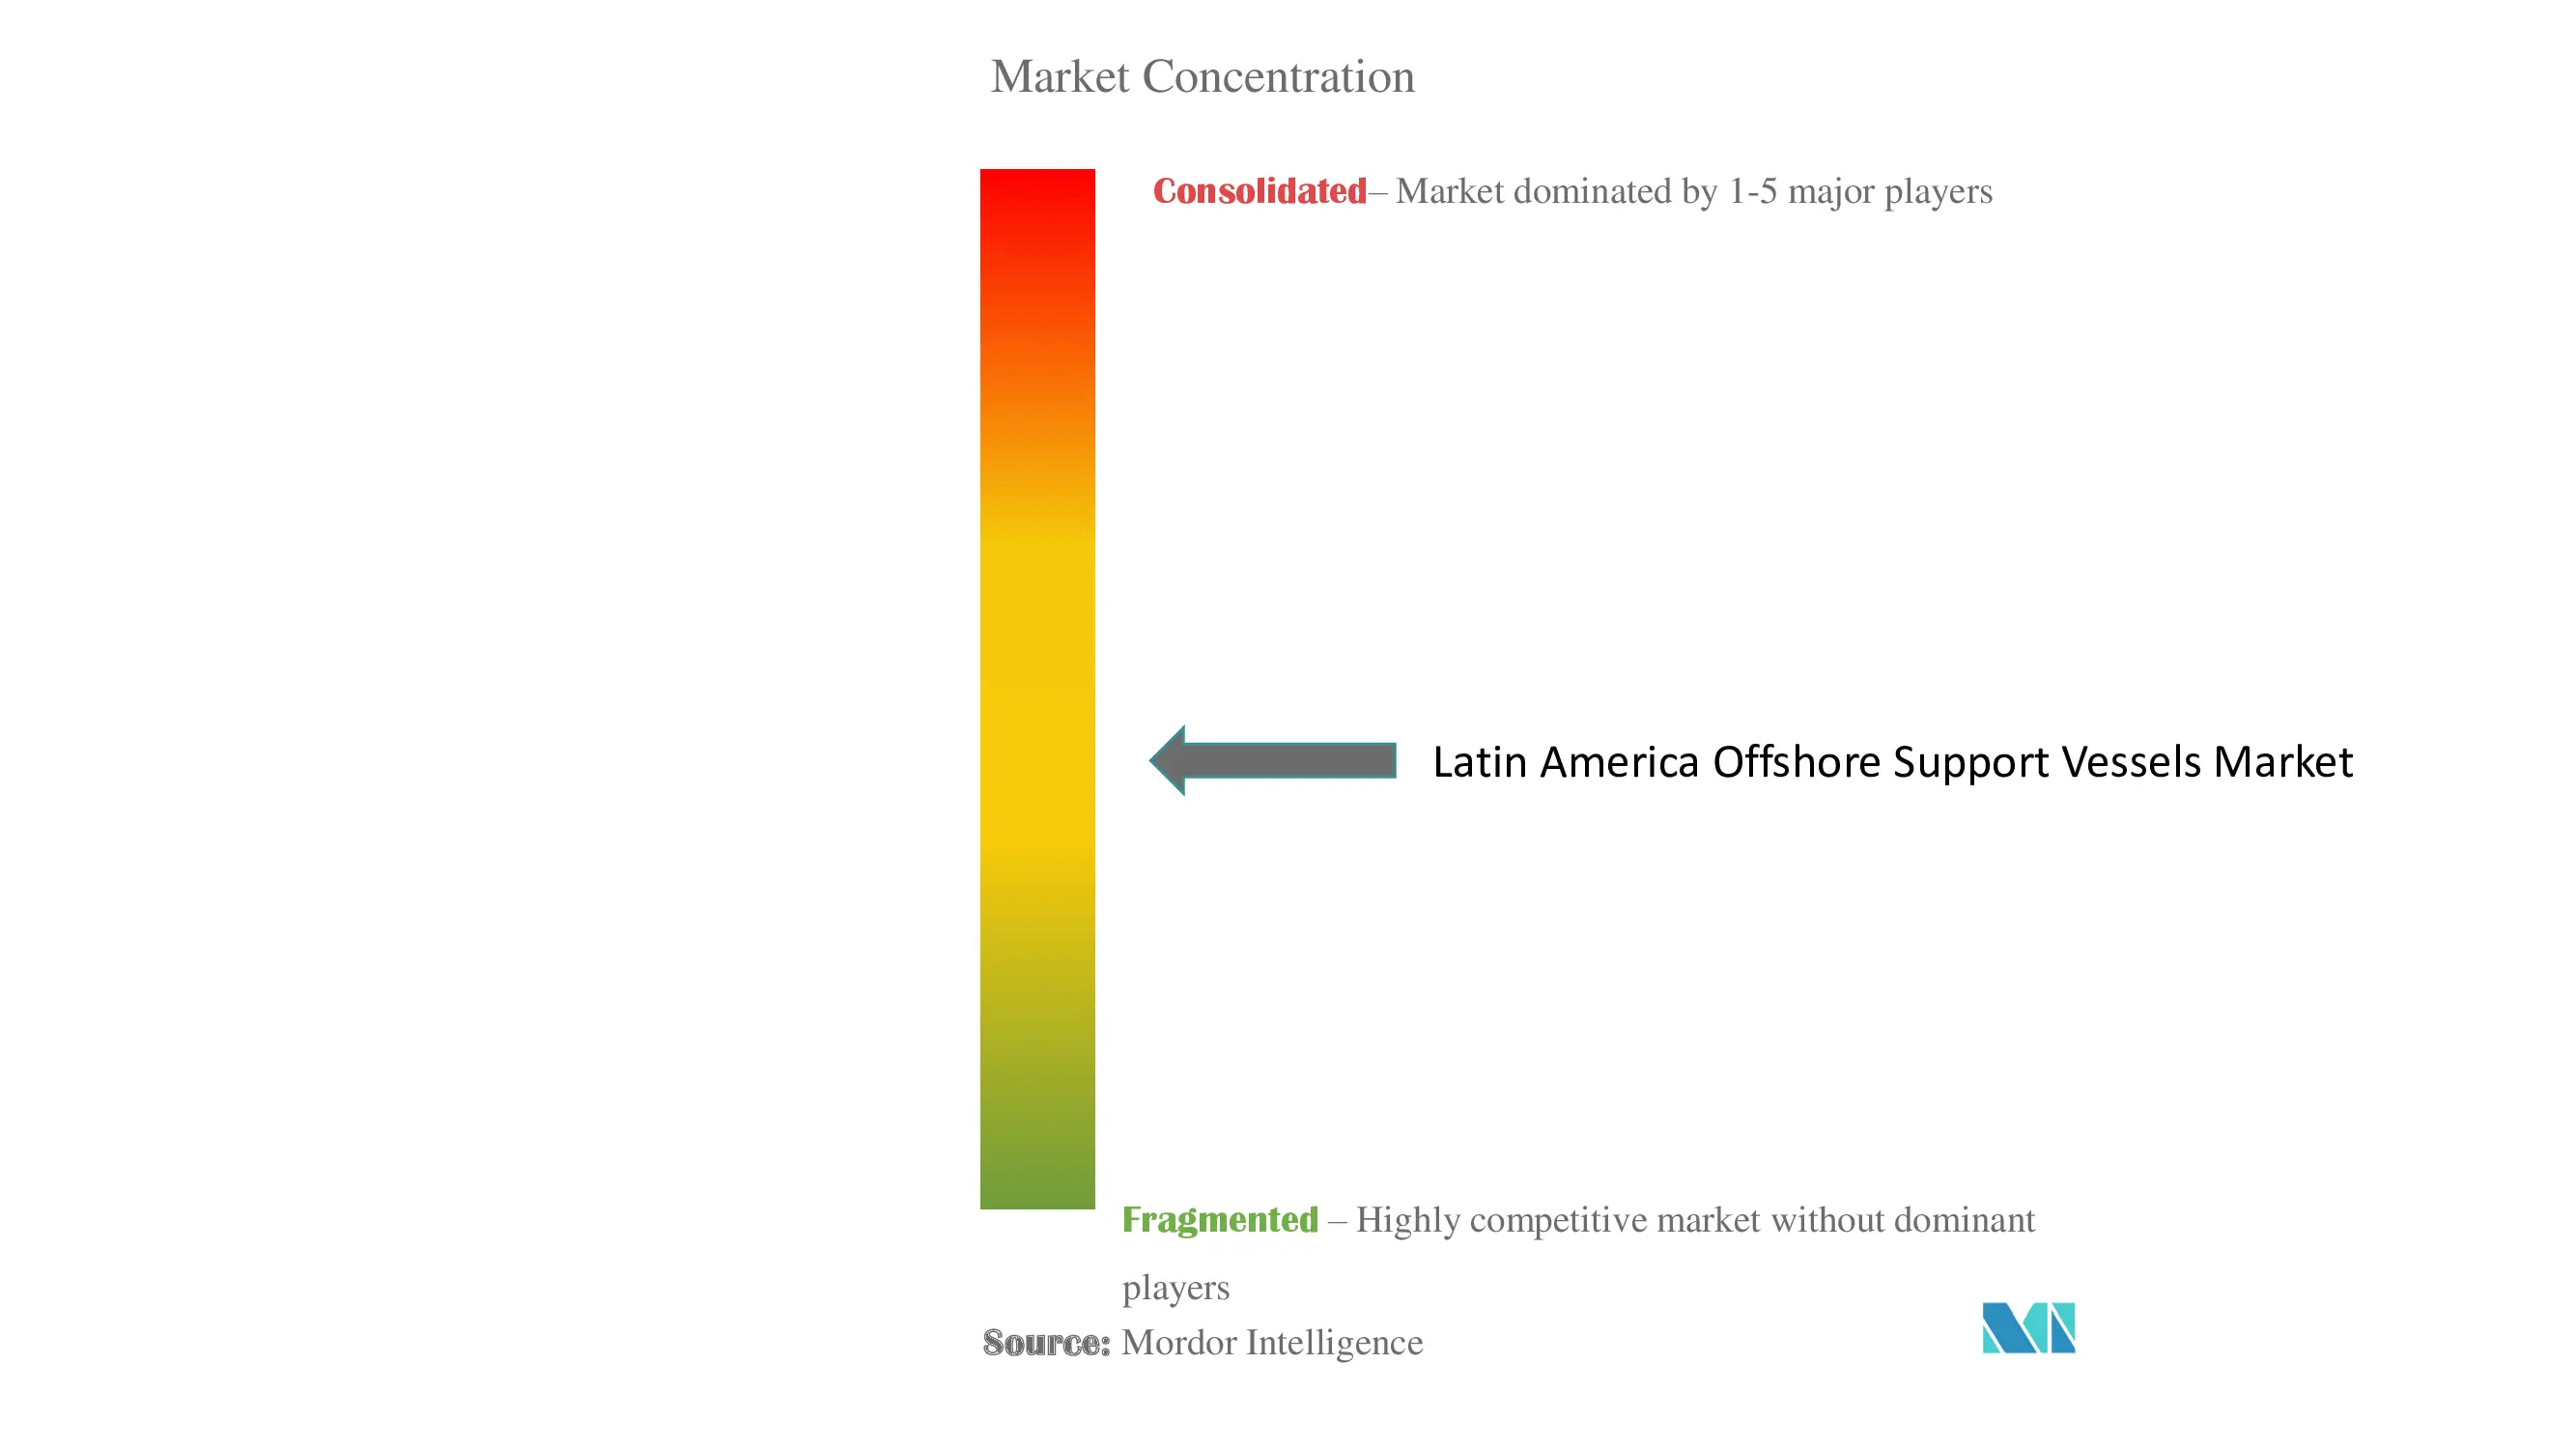 Latin America Offshore Support Vessels Market Concentration